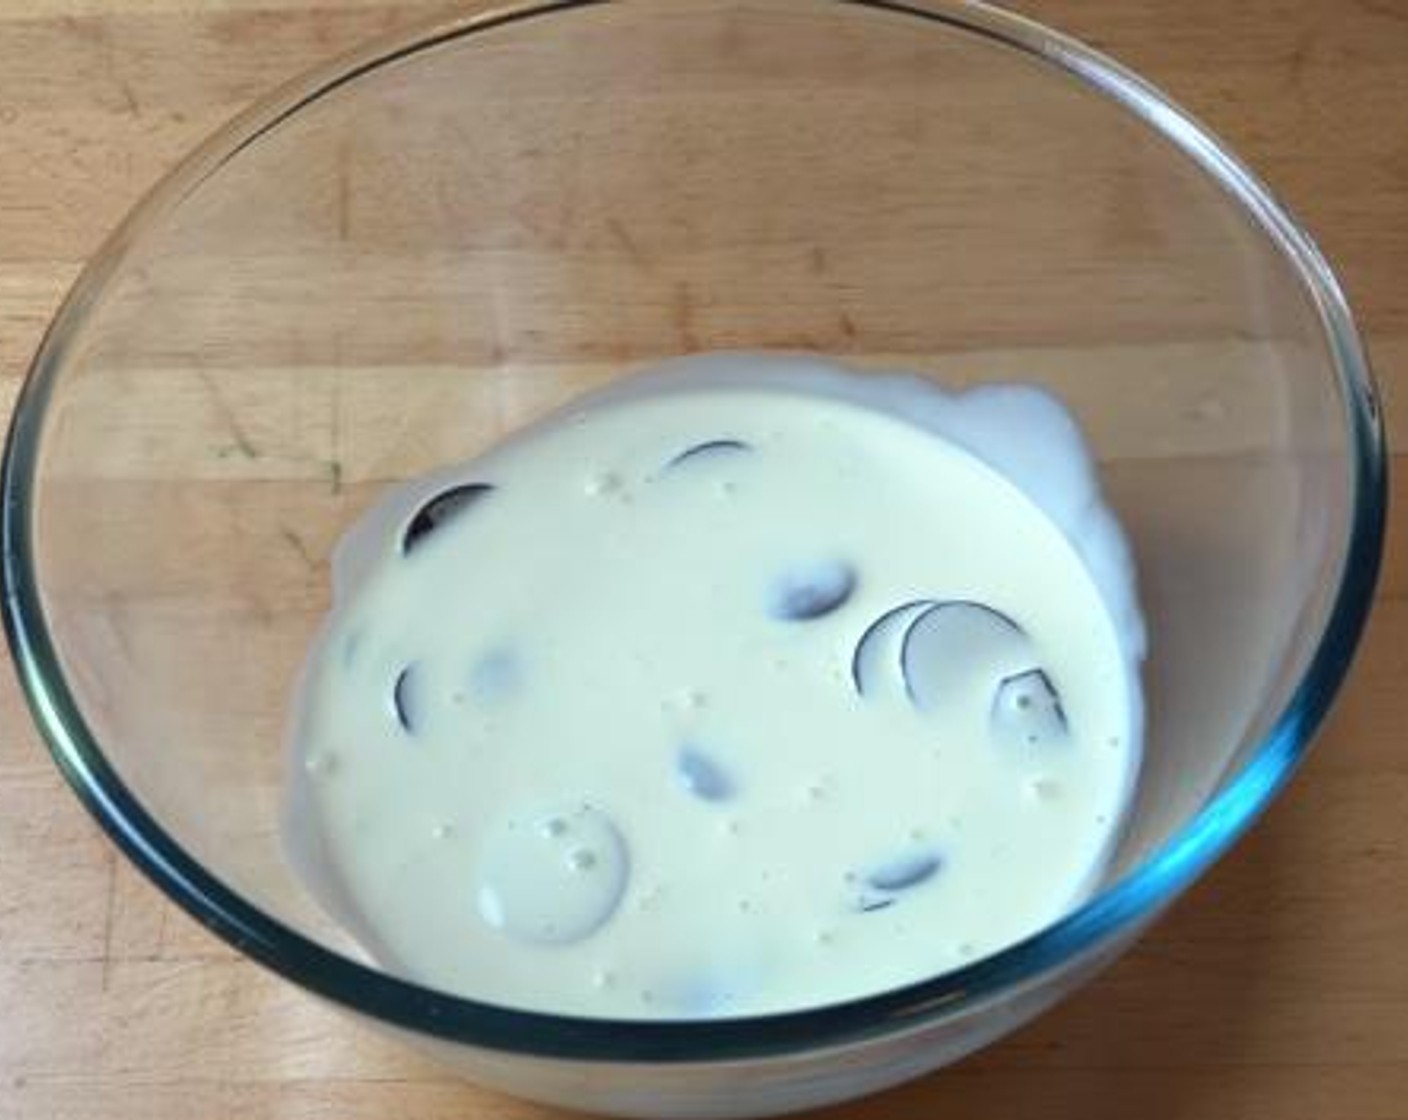 step 1 In a large glass bowl, add half of the Whipping Cream (2 cups) and Dark Chocolate (1 cup). Give the mixture a gentle stir.